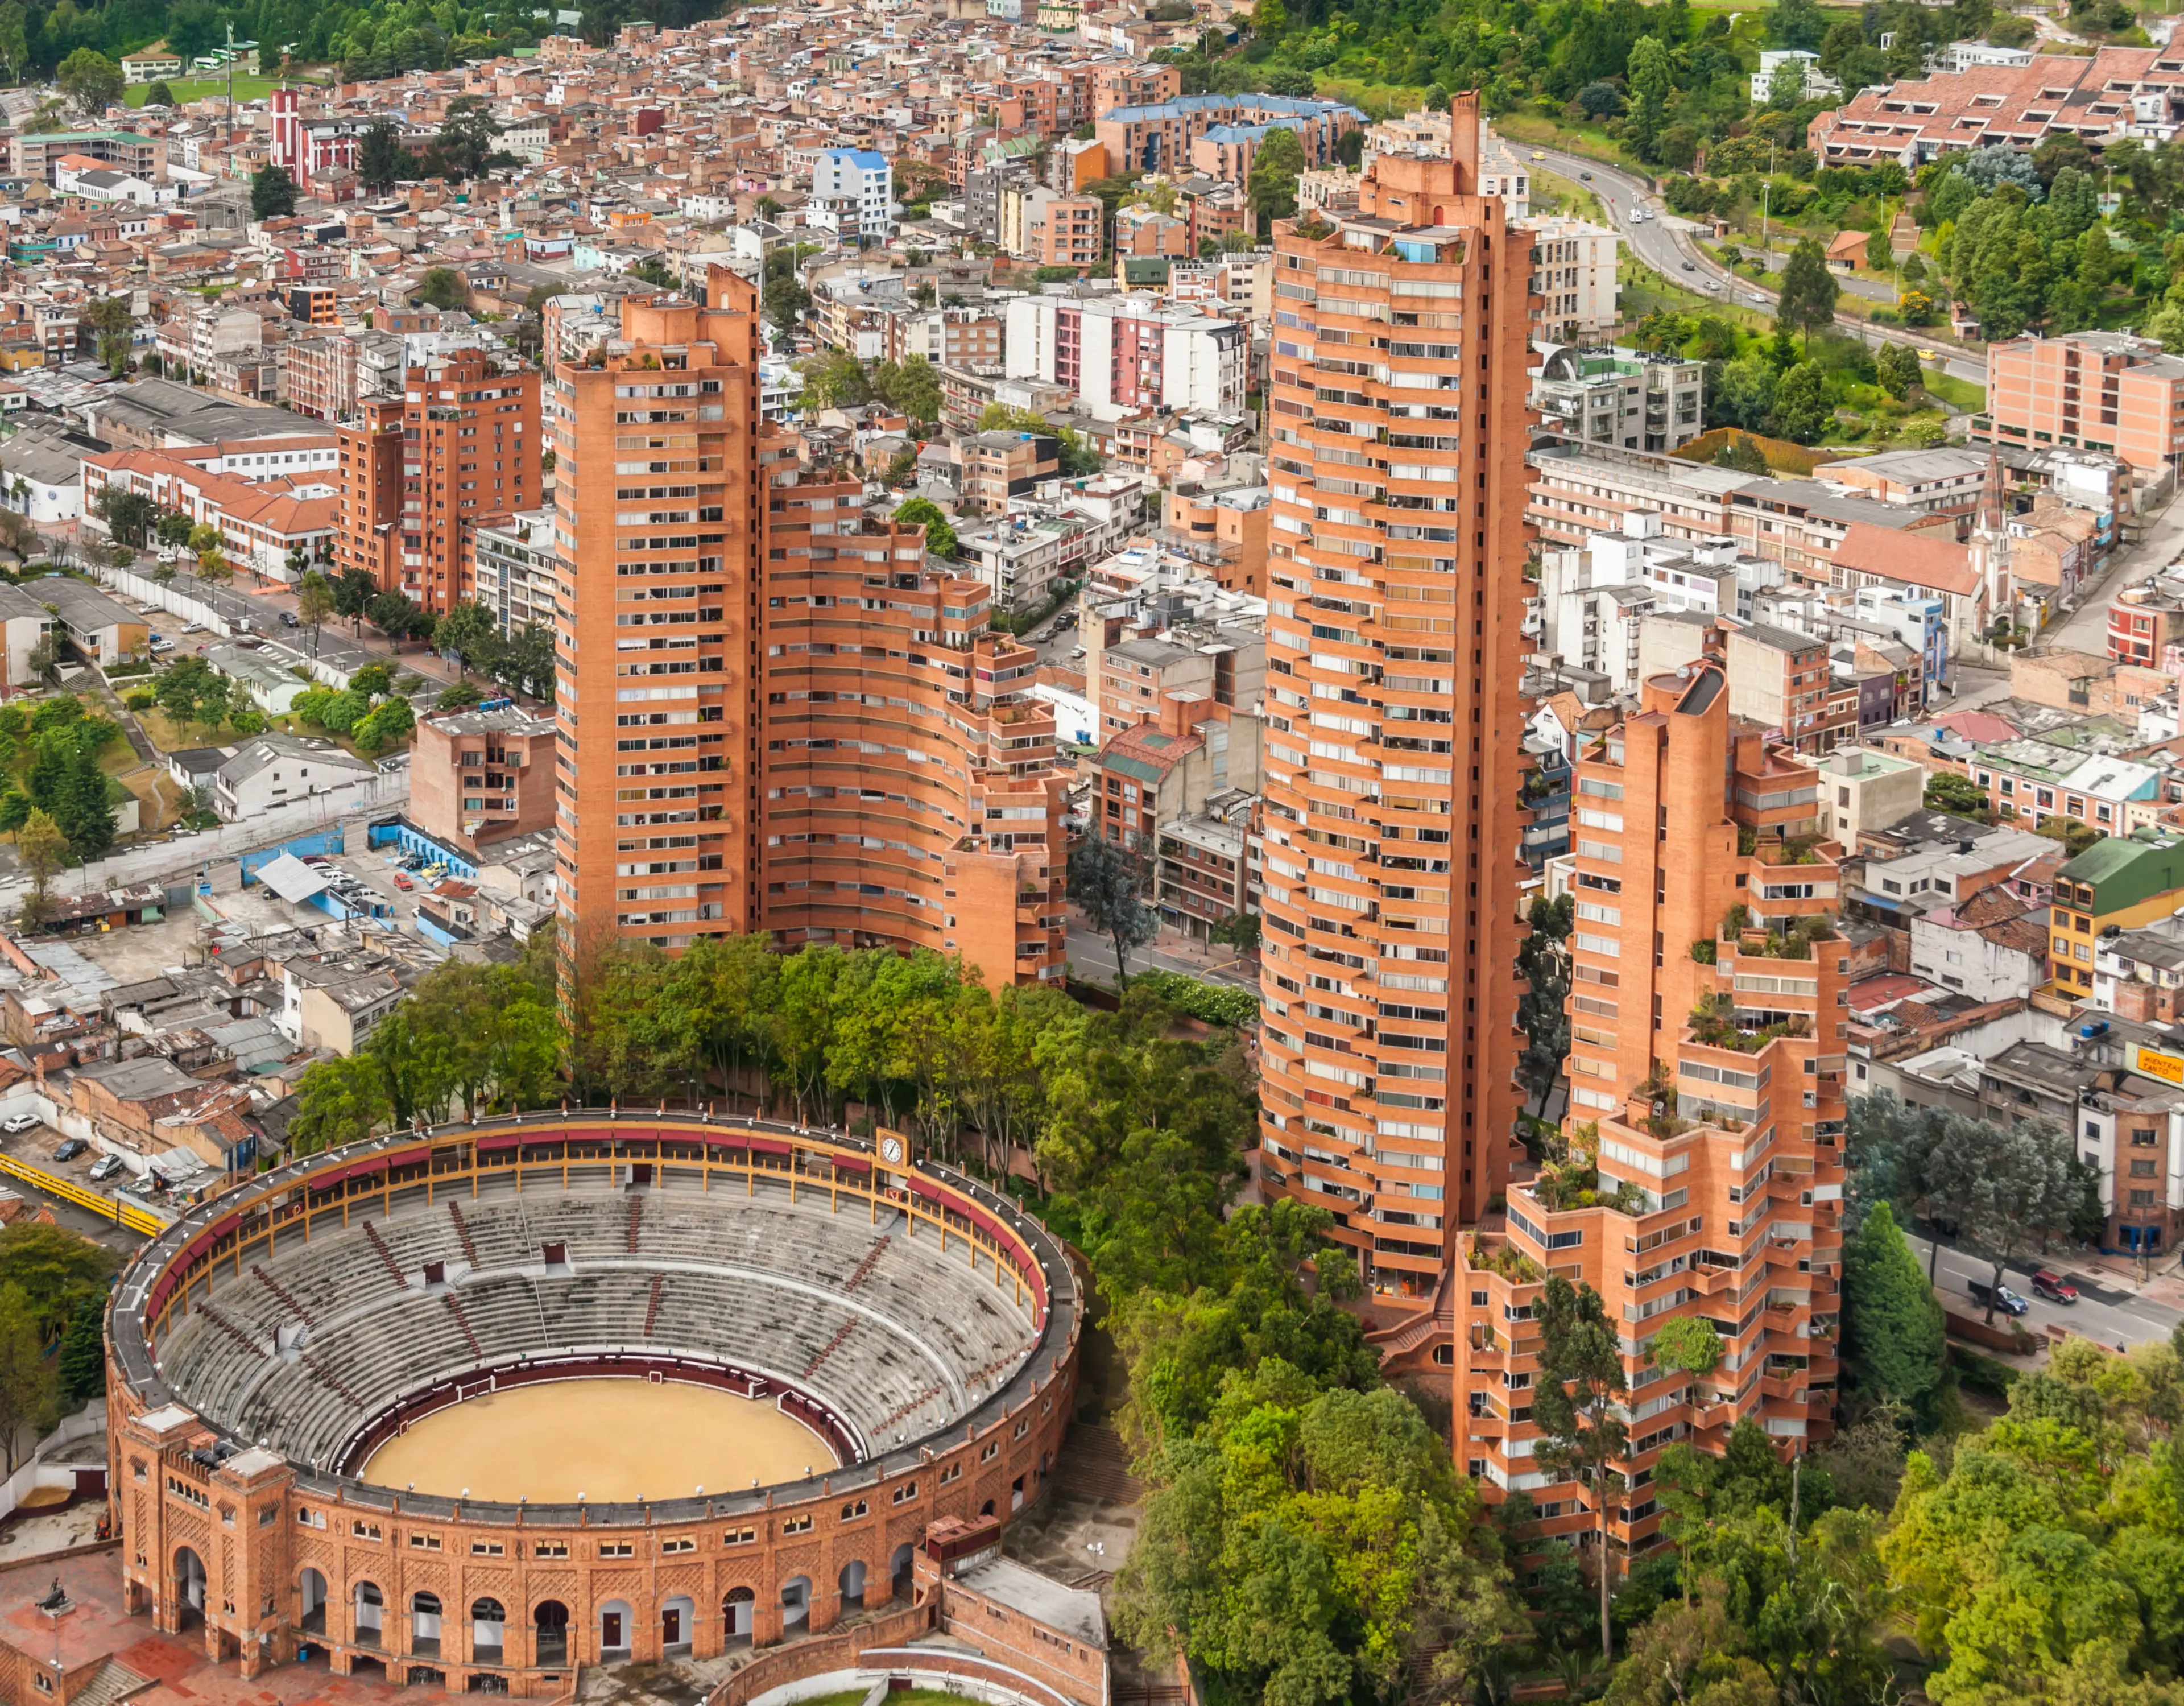 4-Day Family Relaxation and Sightseeing Itinerary in Bogota, Colombia